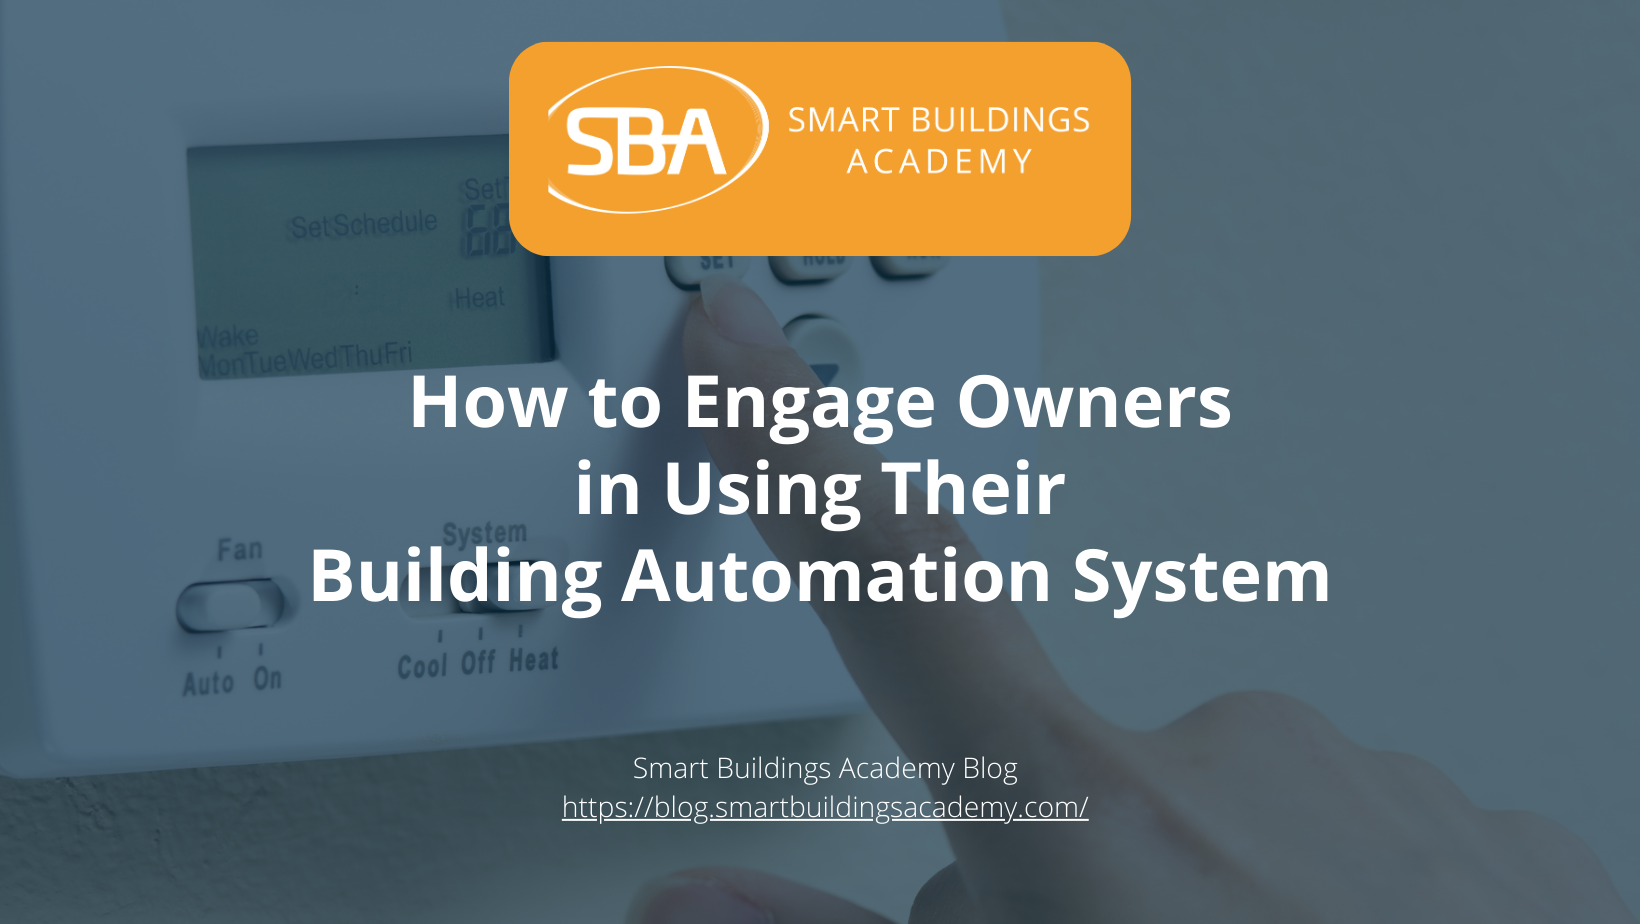 How to Engage Owners in Using Their Building Automation System